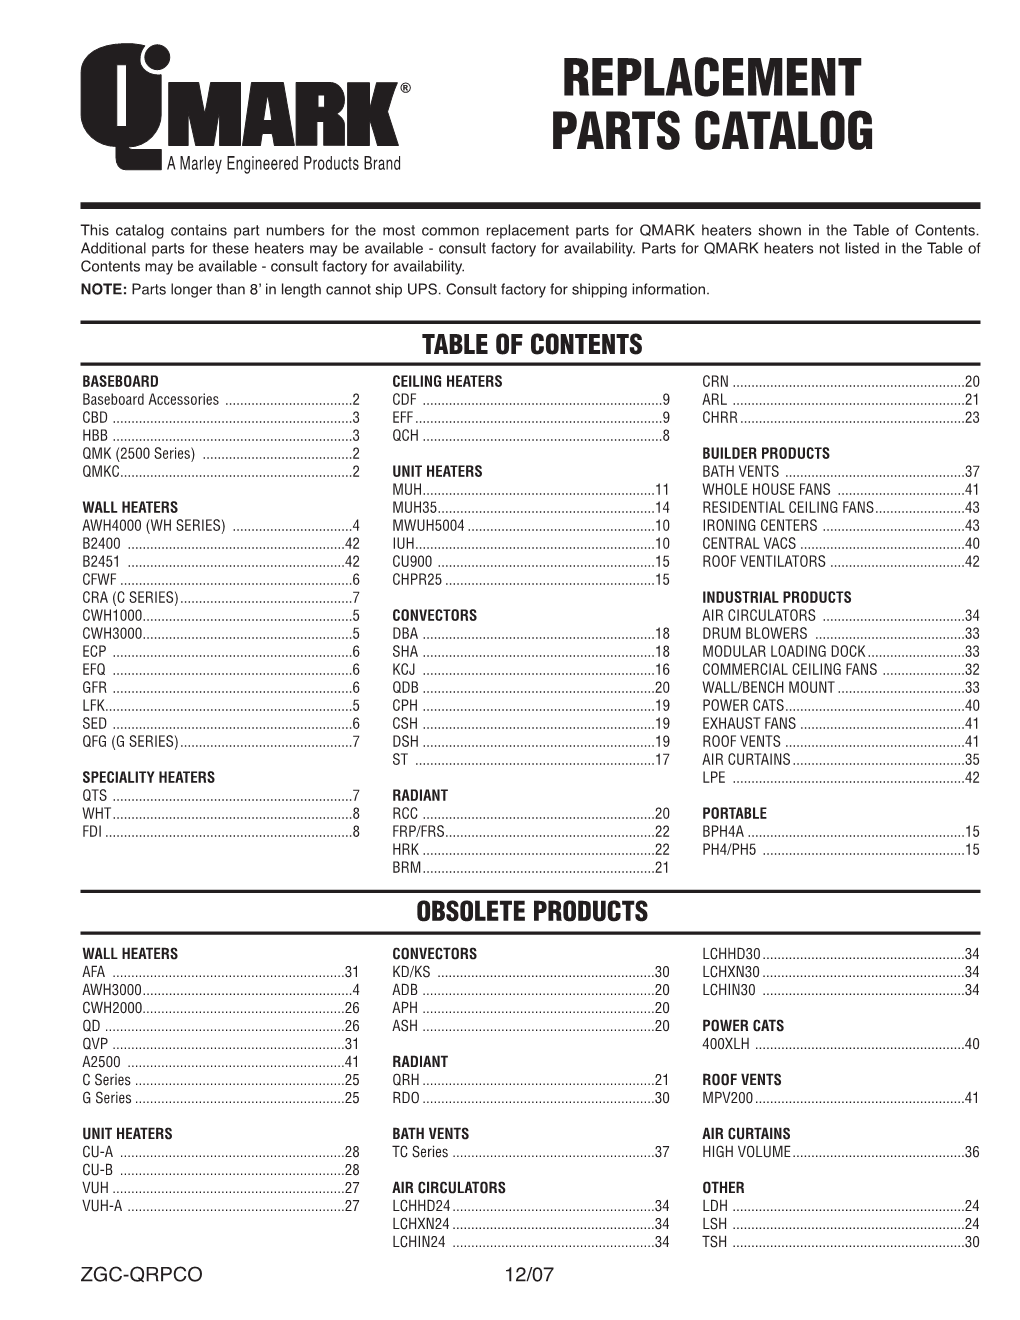 Replacement Parts with Drawings in .Pdf Format